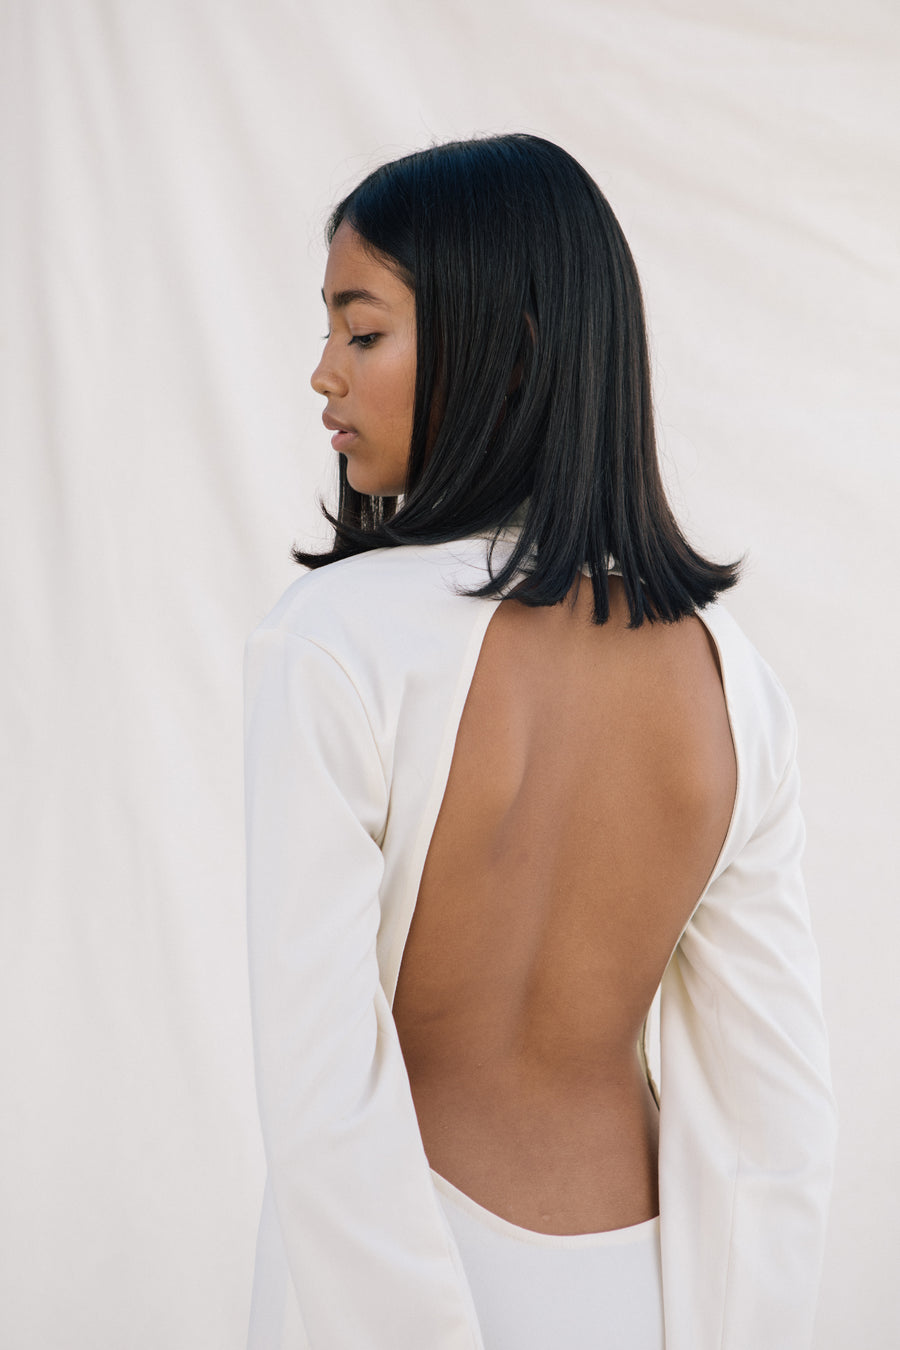 The Backless Dress